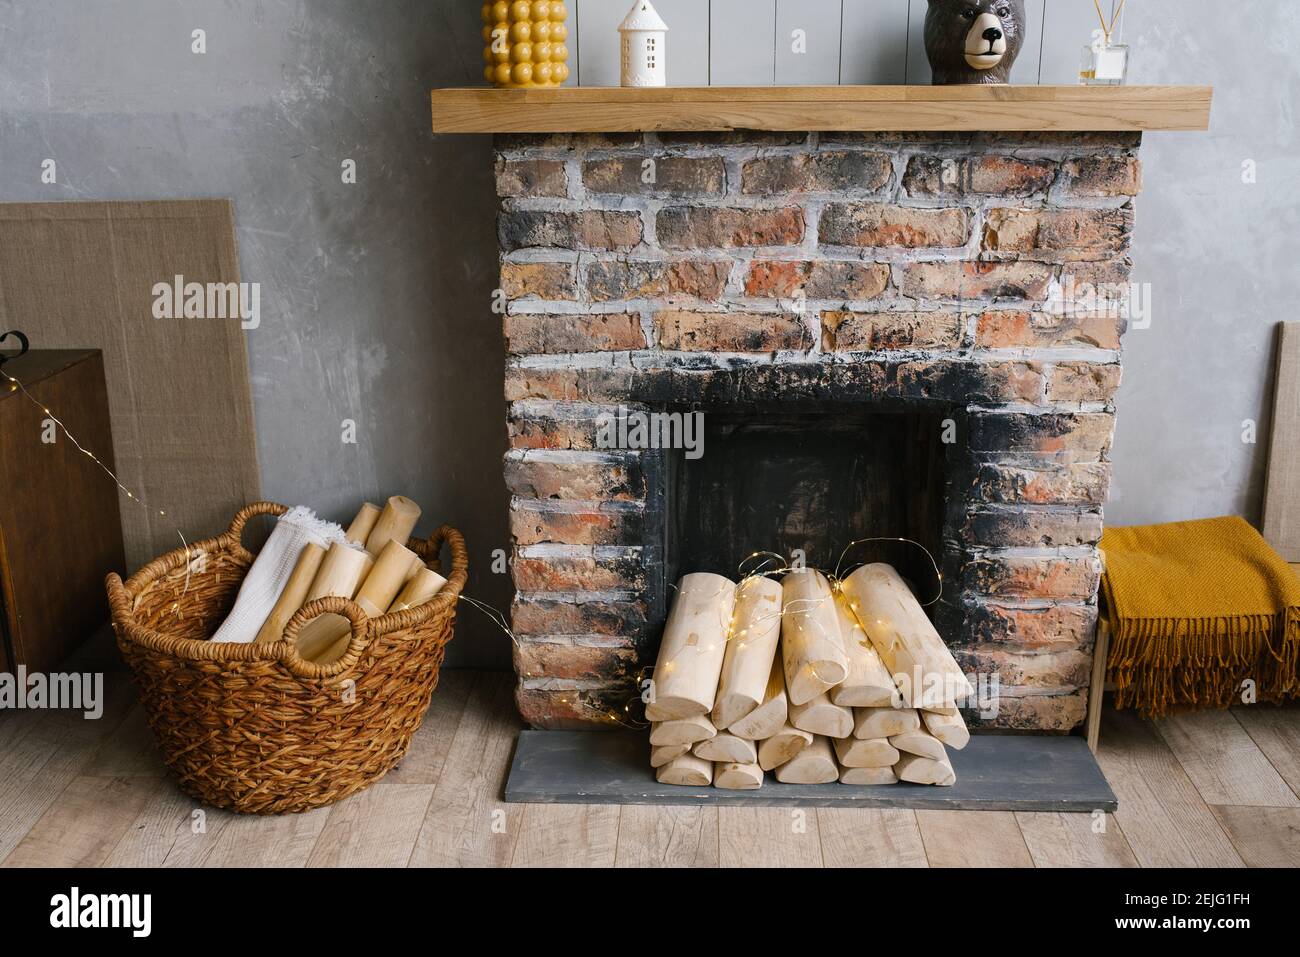 Scandinavian interior with red brick fireplace, wicker basket for firewood, pile of logs for a fire Stock Photo